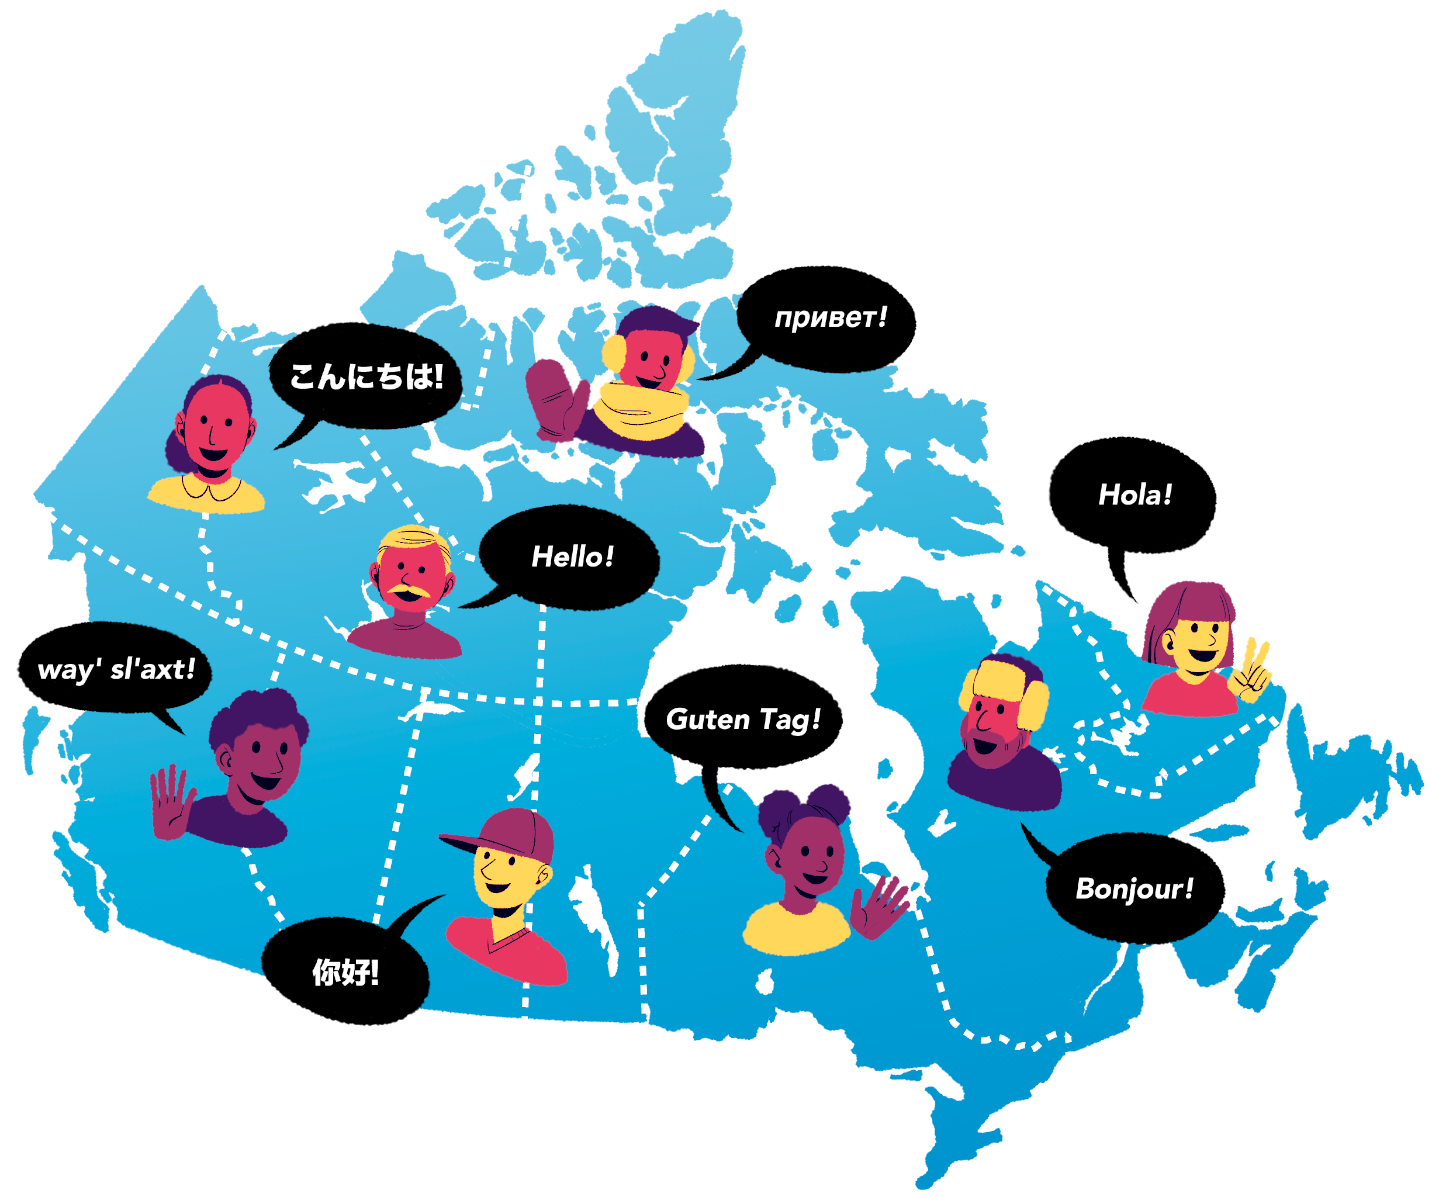 _images/canada_map.png